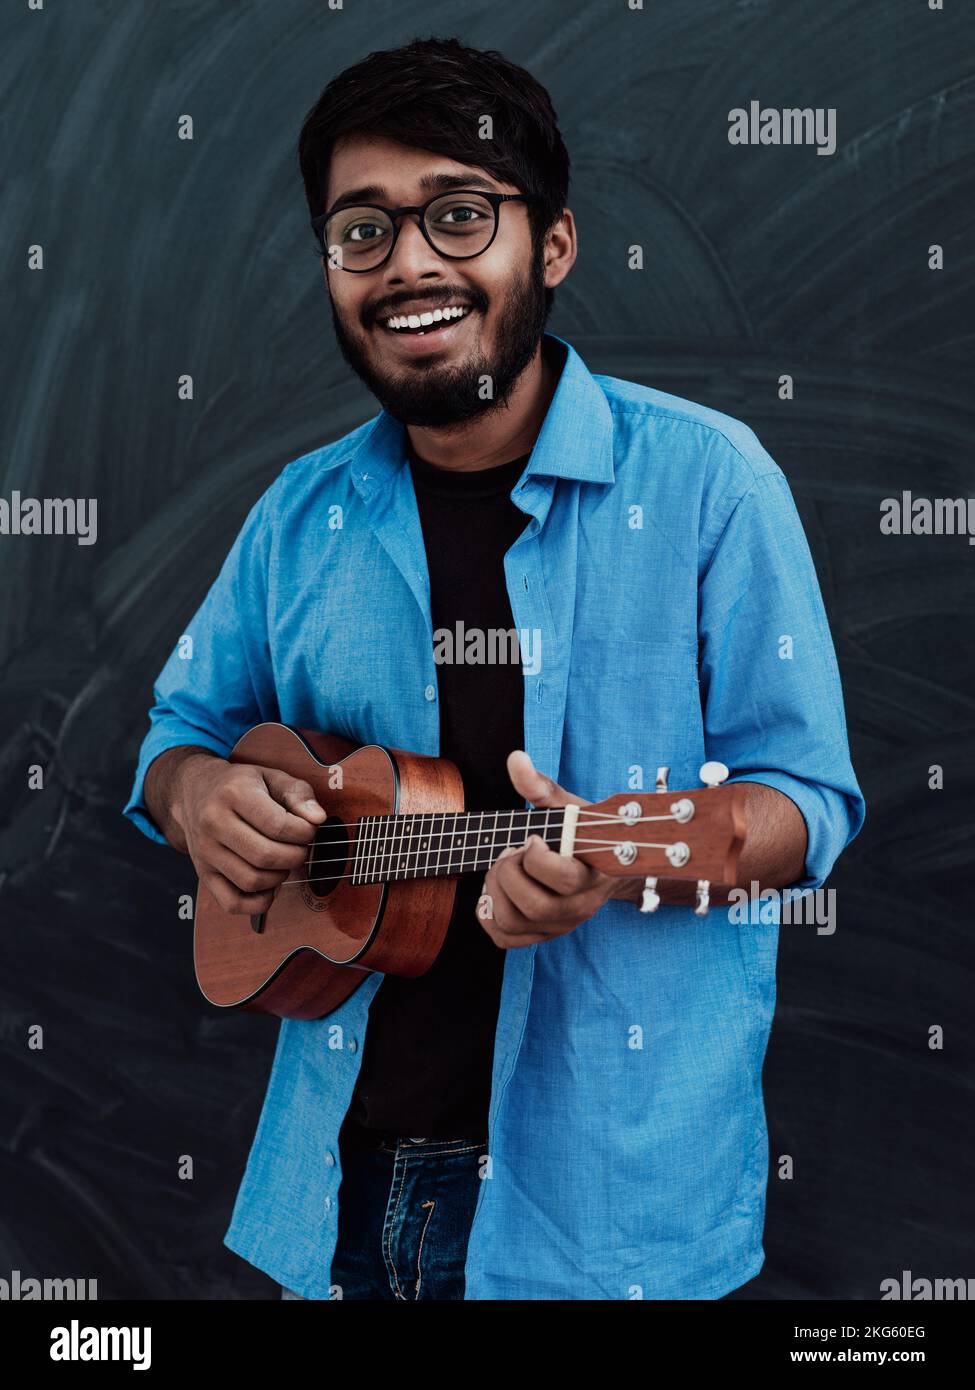 Indian young man in a blue shirt and glasses playing the guitar in front of the school blackboard Stock Photo